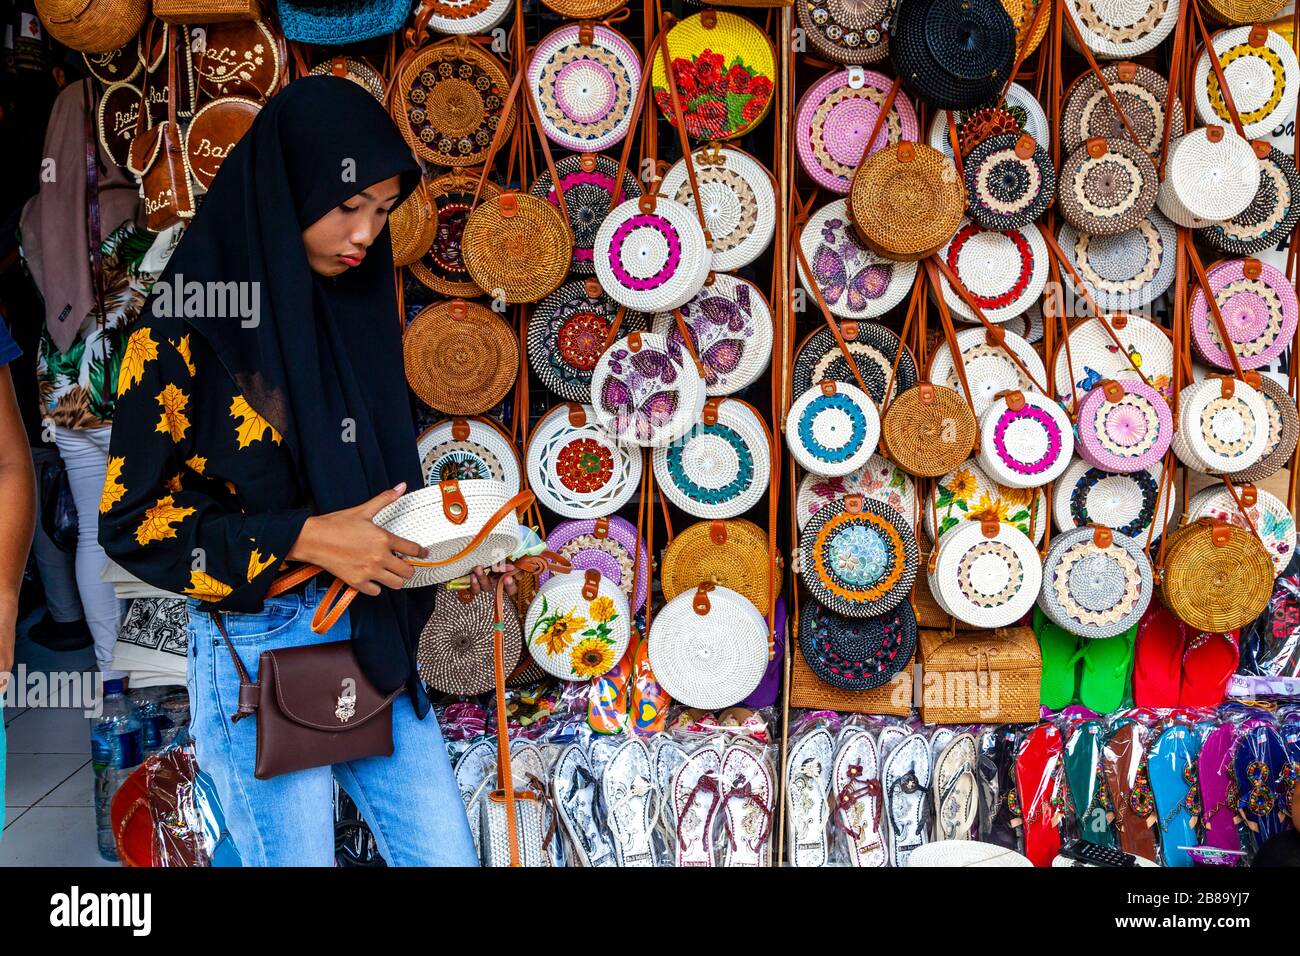 A Young Woman Browses The Bags/Hand bags That Are For Sale, The Sukawati Art Market, Gianyar, Bali, Indonesia. Stock Photo